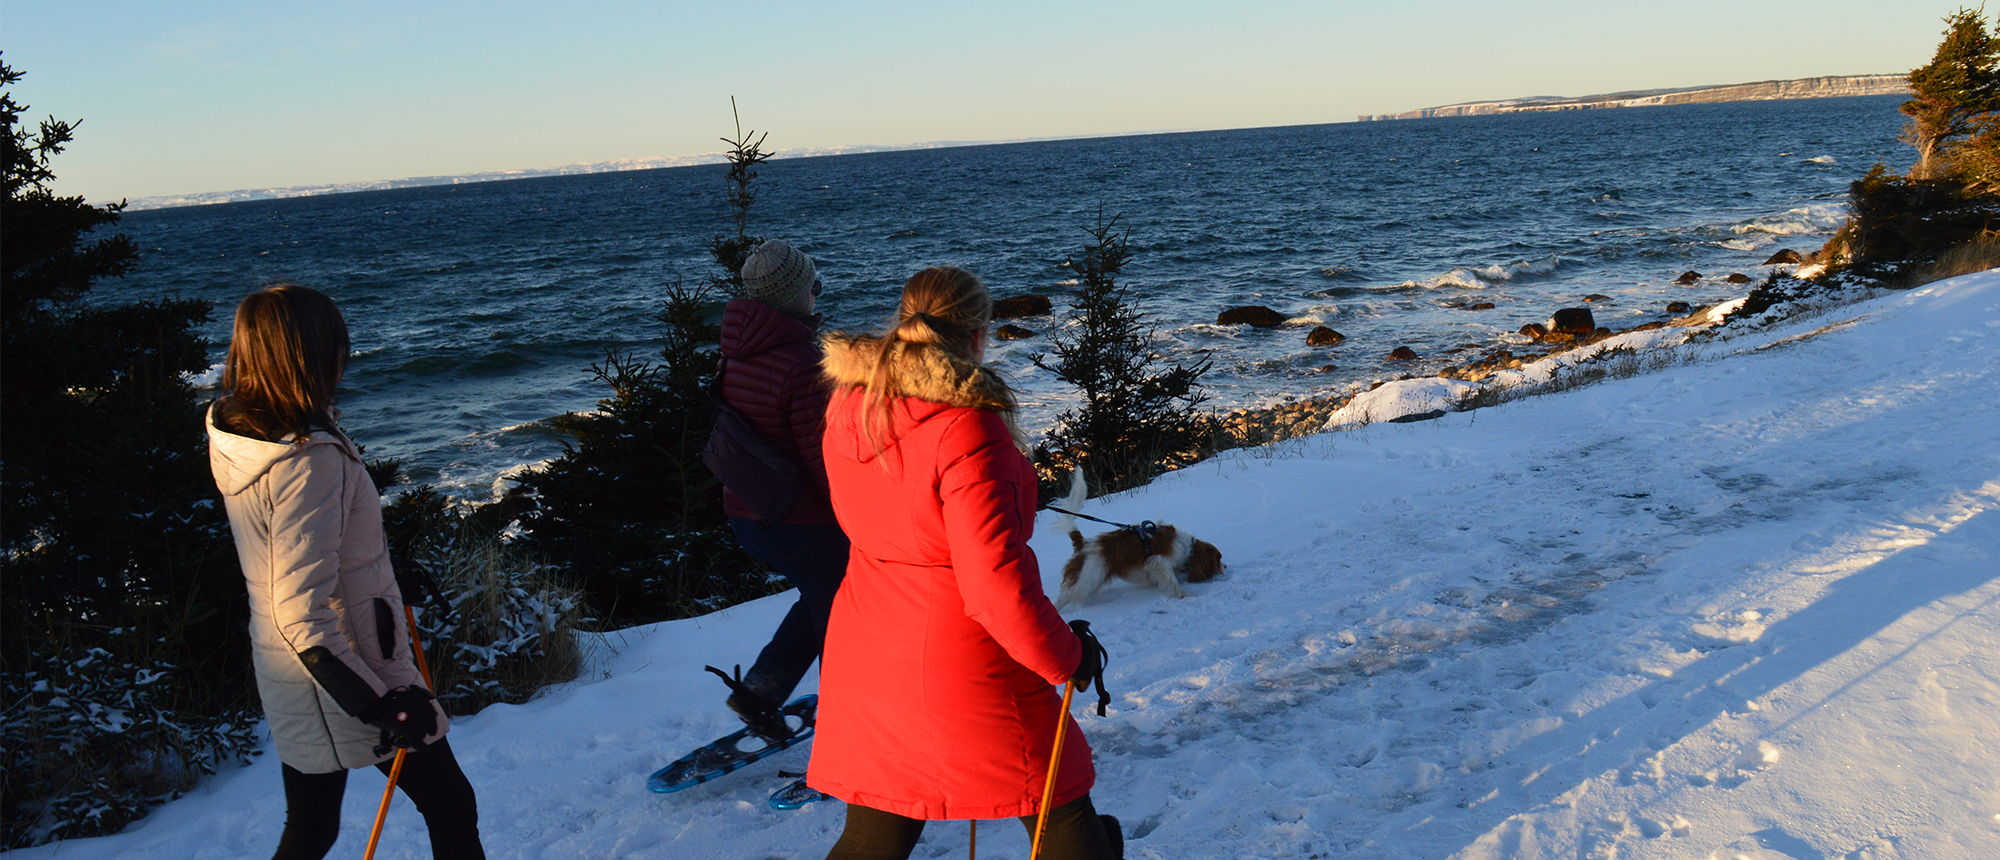 Conception Bay South Offers Top Trail Destination